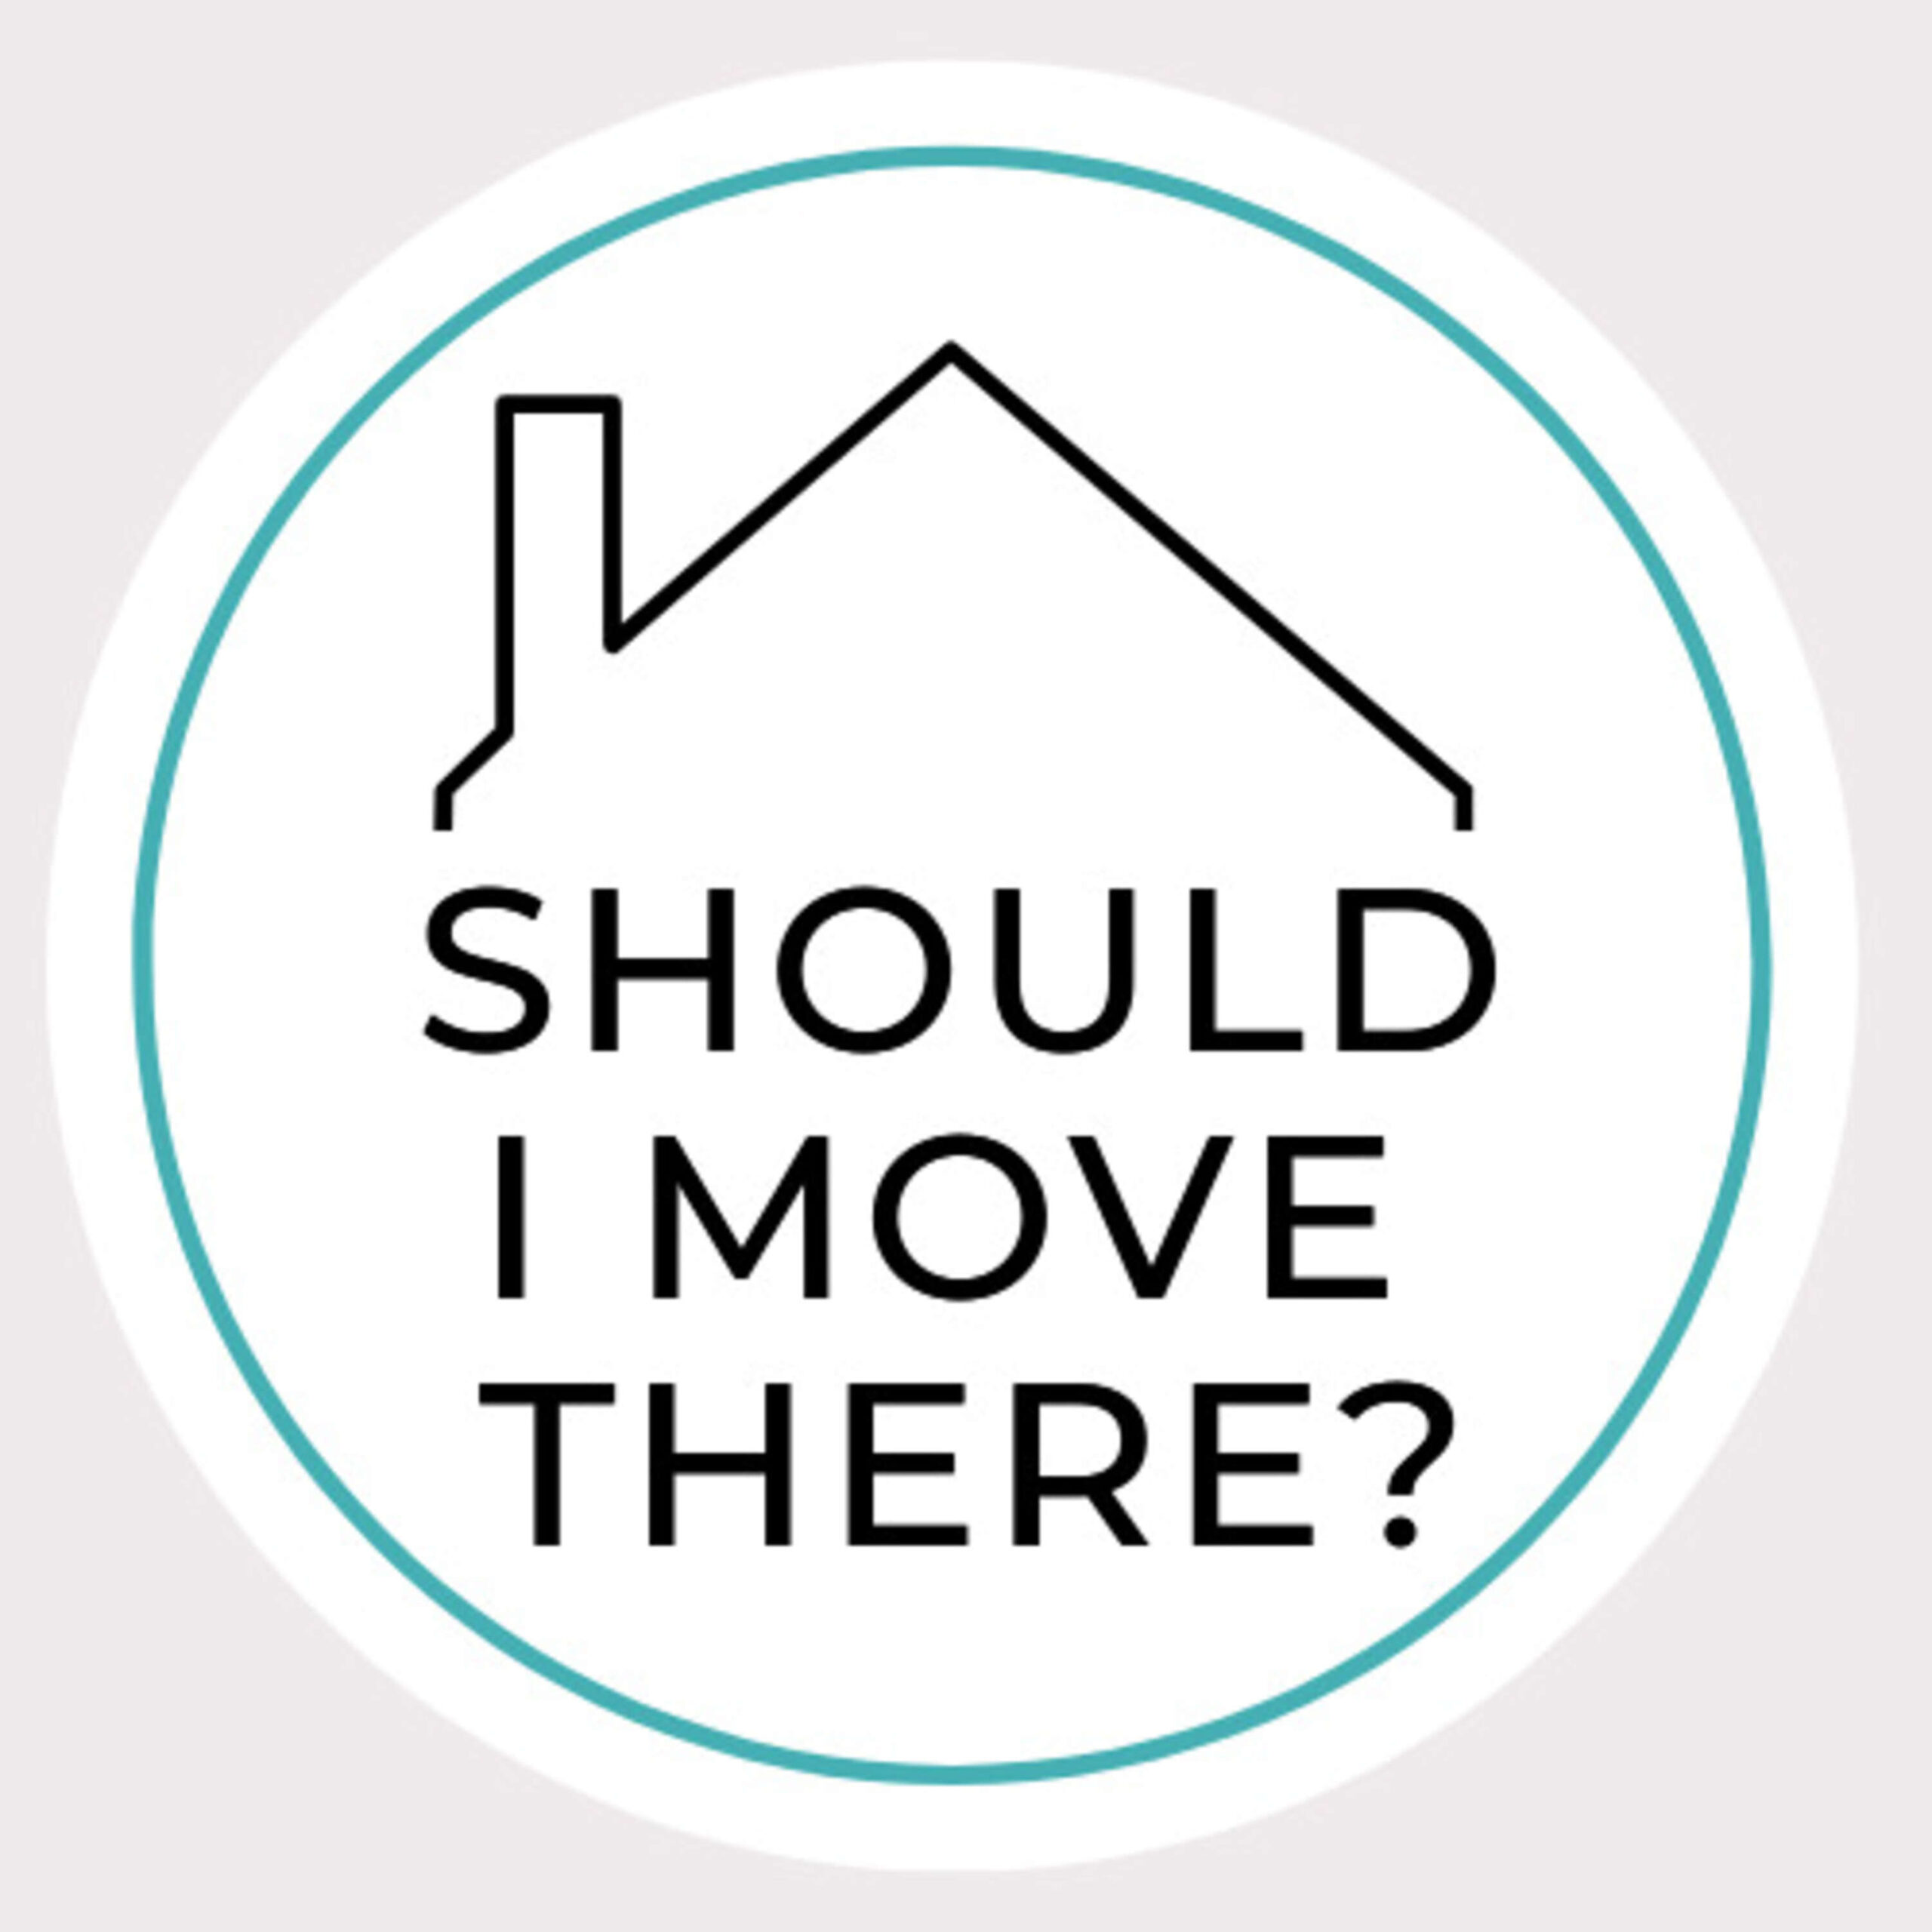 Vegas Faces’ David & Mary Gavri Are Guests On The “Should I Move There?” Podcast!